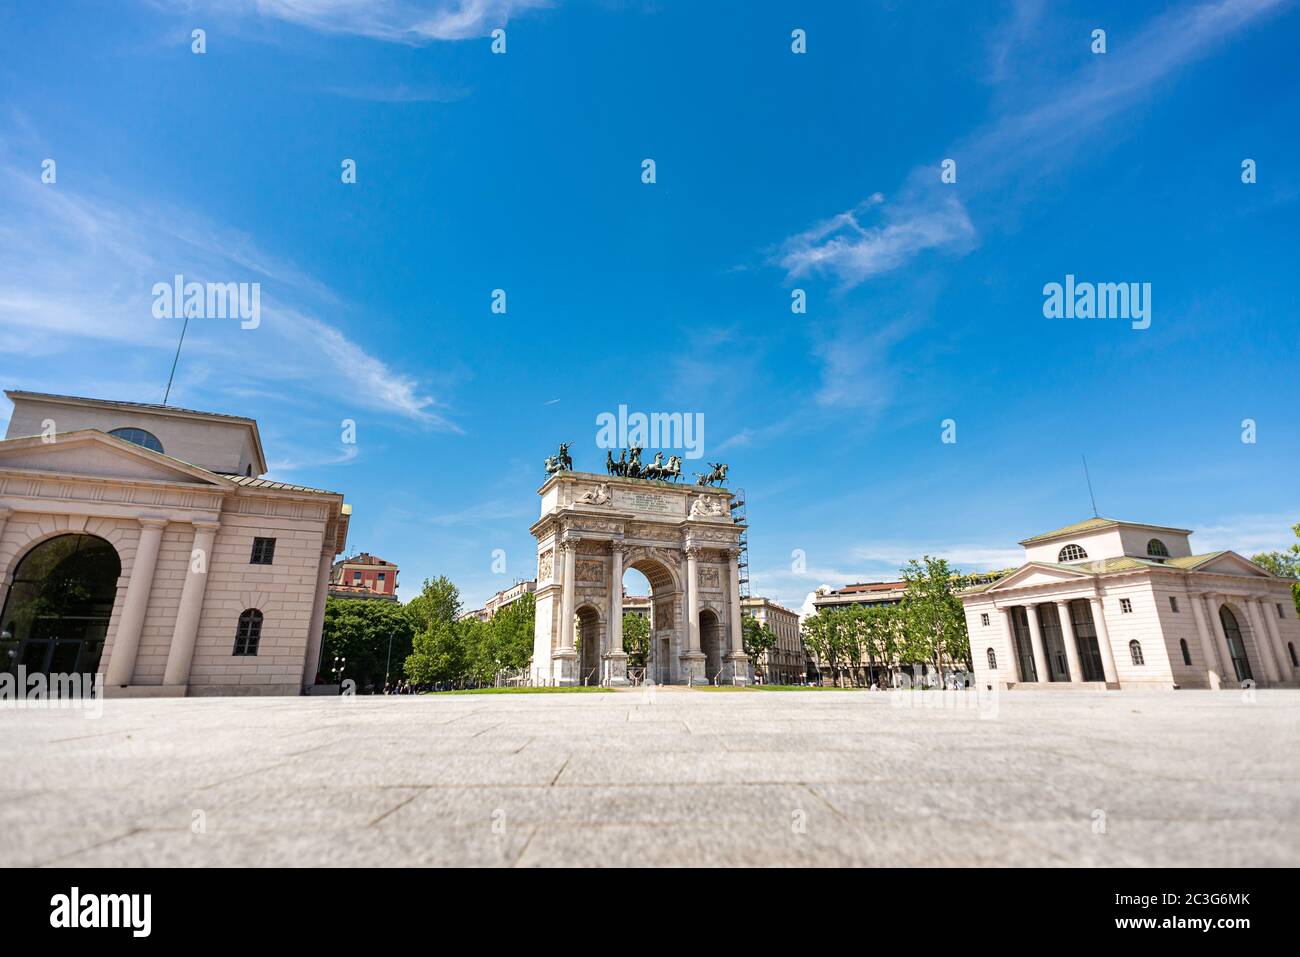 Arco della Pace or 'Arch of Peace' in Milan, Italy. City Gate of Milan Located at Center of Simplon Square. Stock Photo